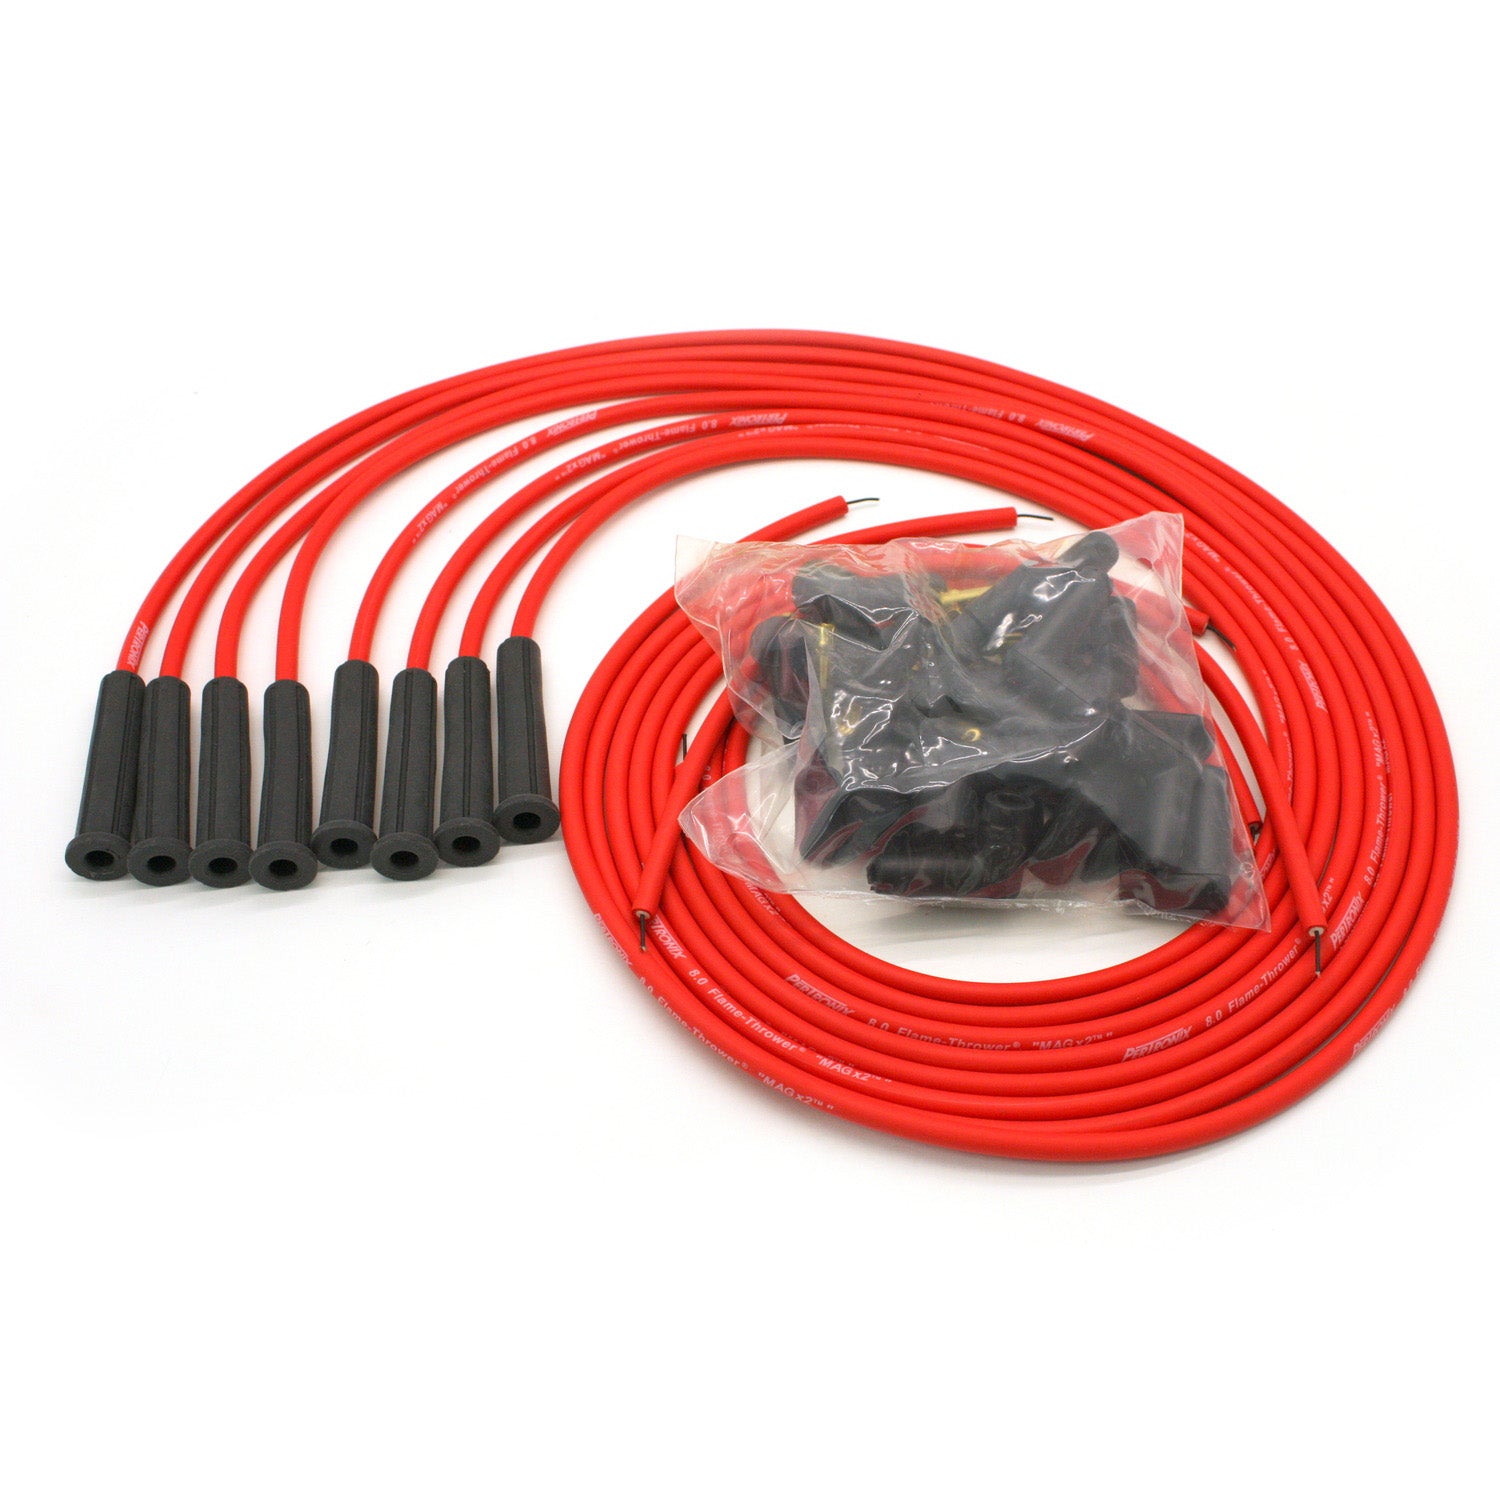 PerTronix 808480 Flame-Thrower Spark Plug Wires 8 cyl 8mm Universal 180 Degree Red